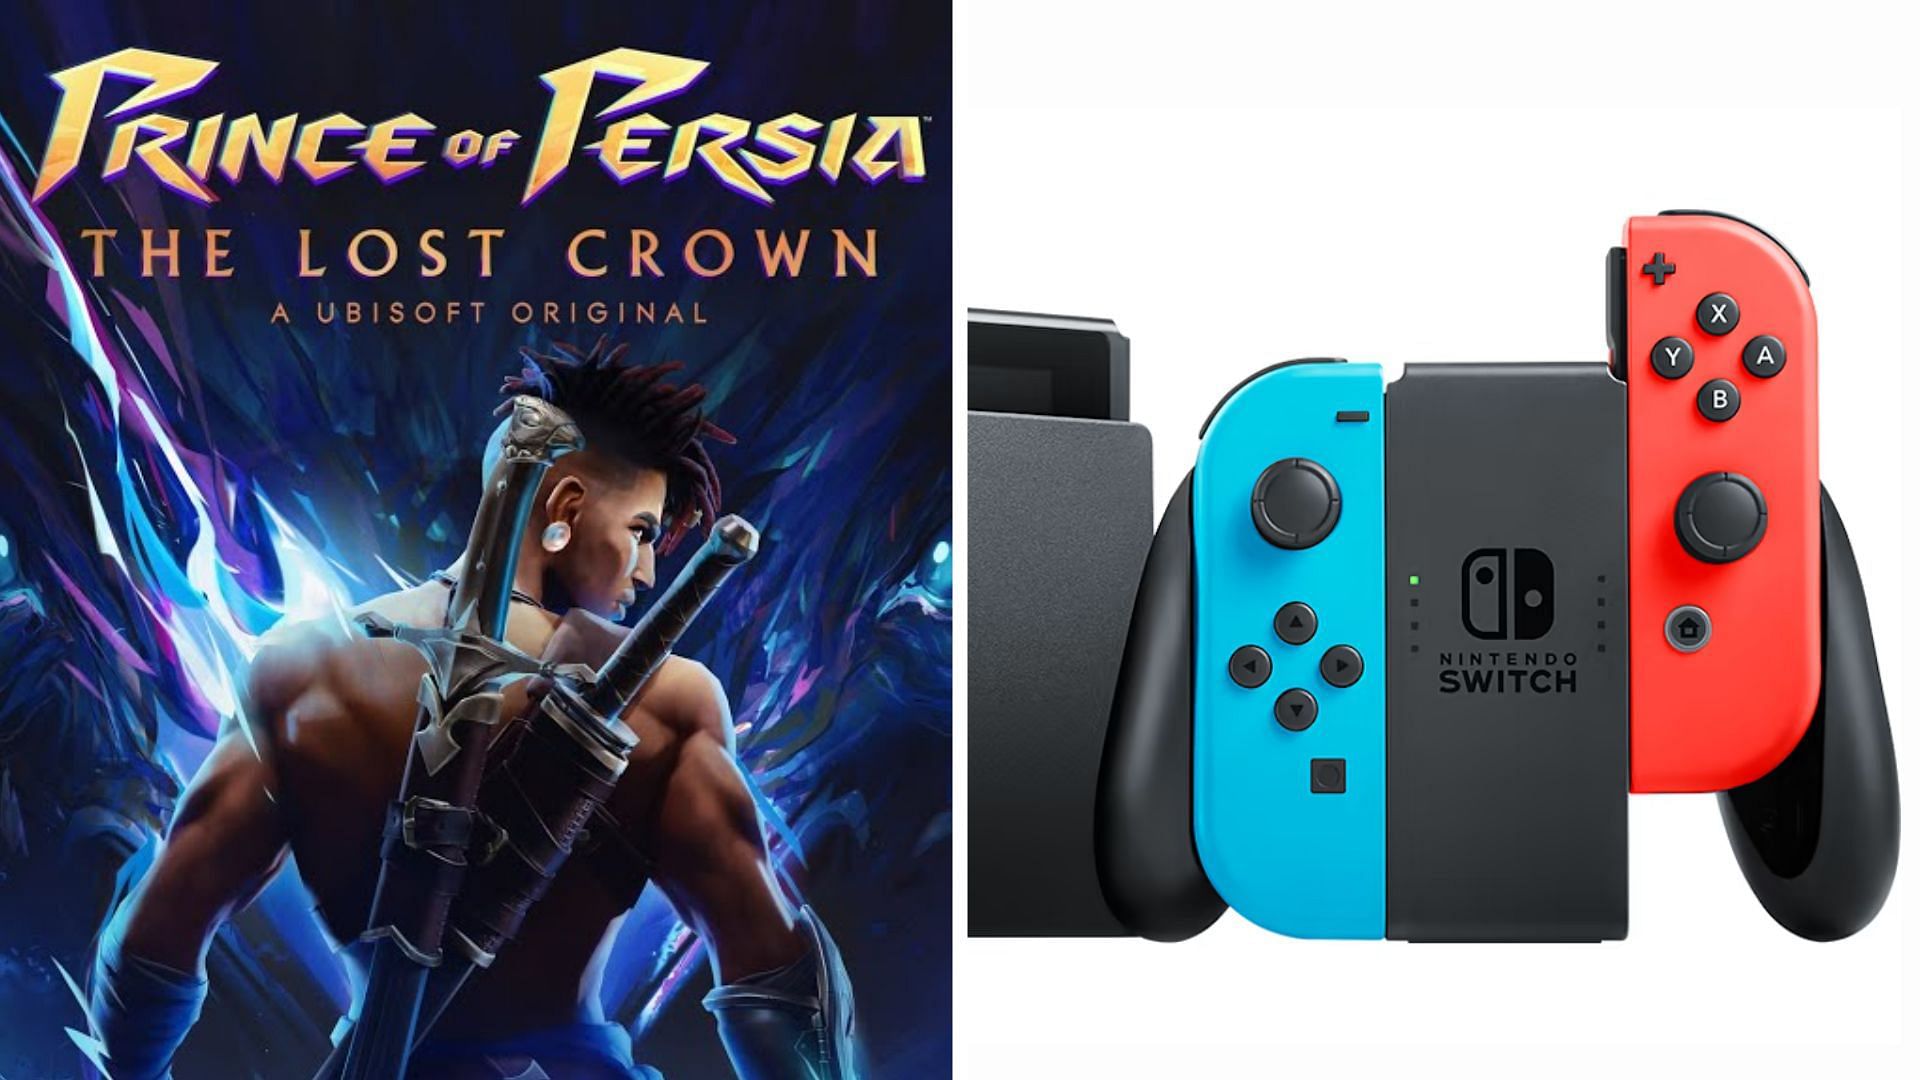 Is Prince of Persia: The Lost Crown worth playing on Switch